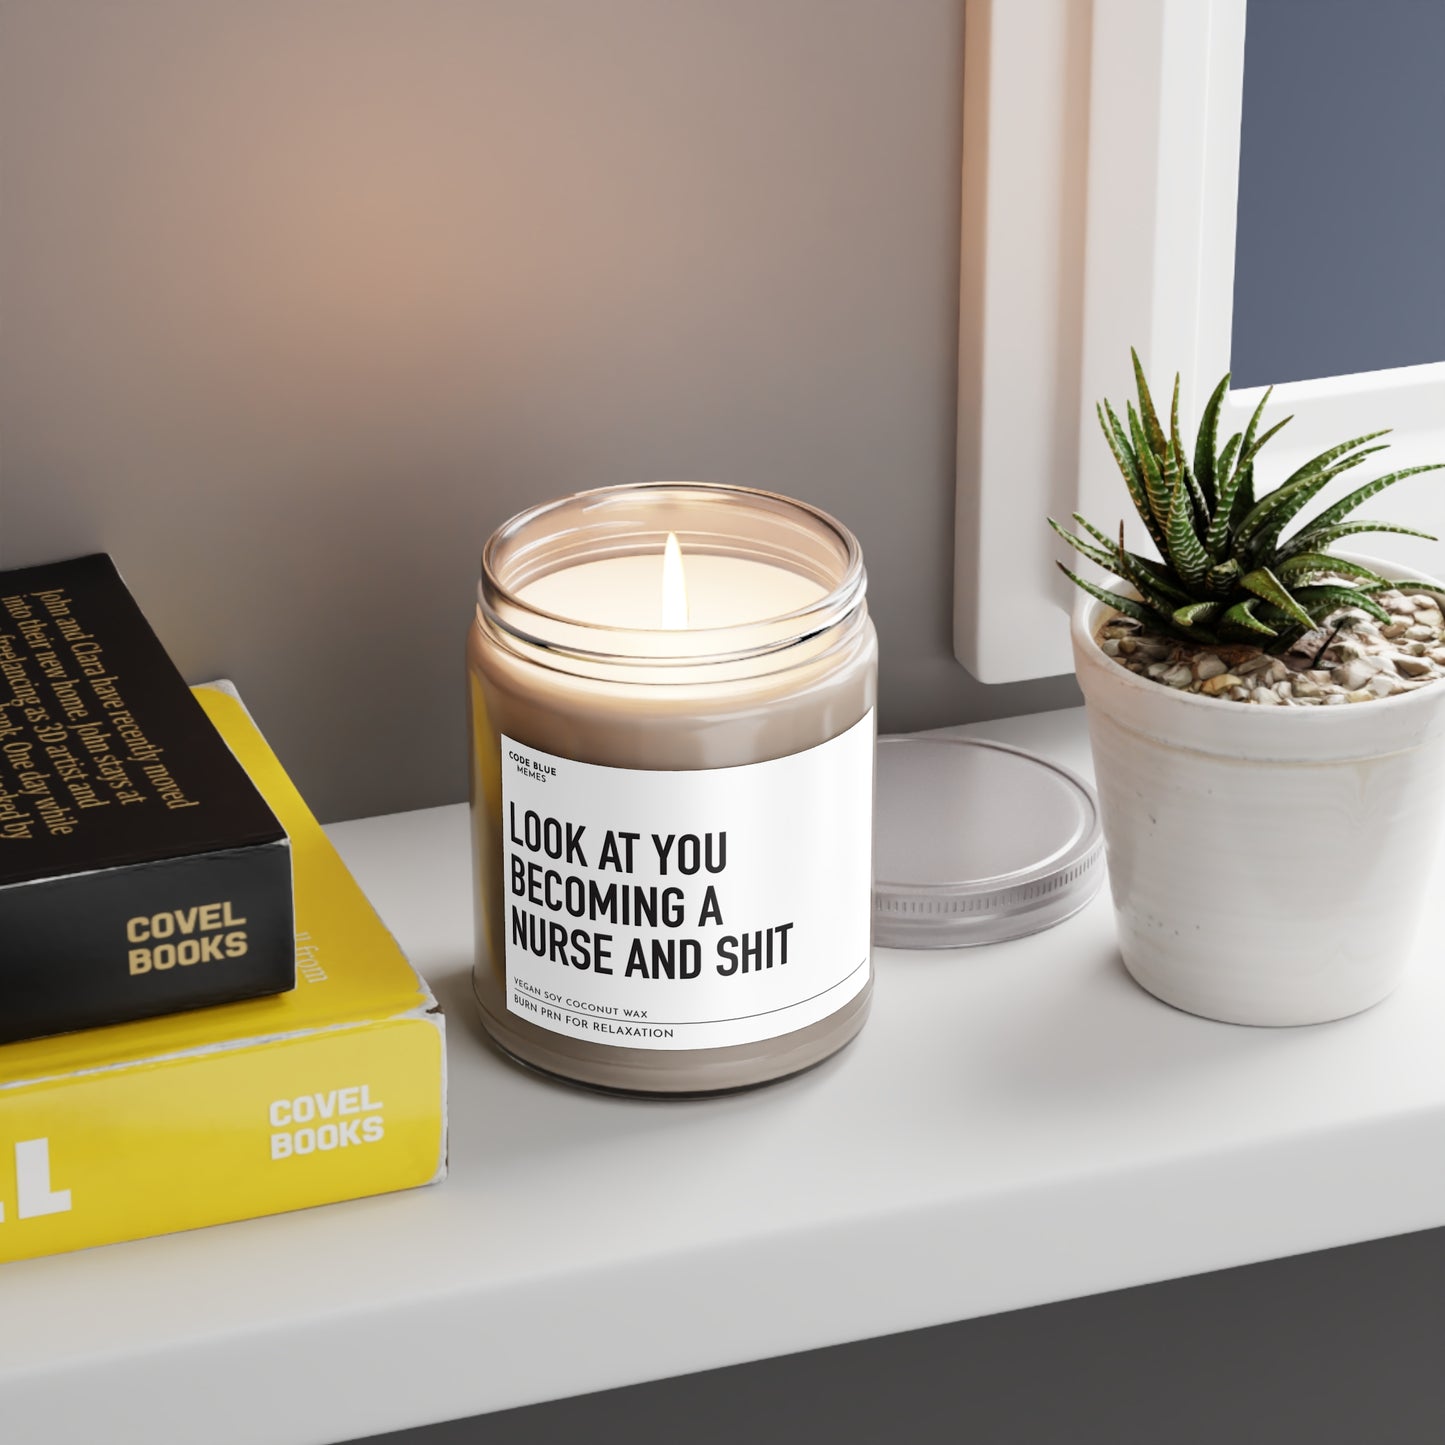 Loot At You Becoming A Nurse And Shit - Scented Candle